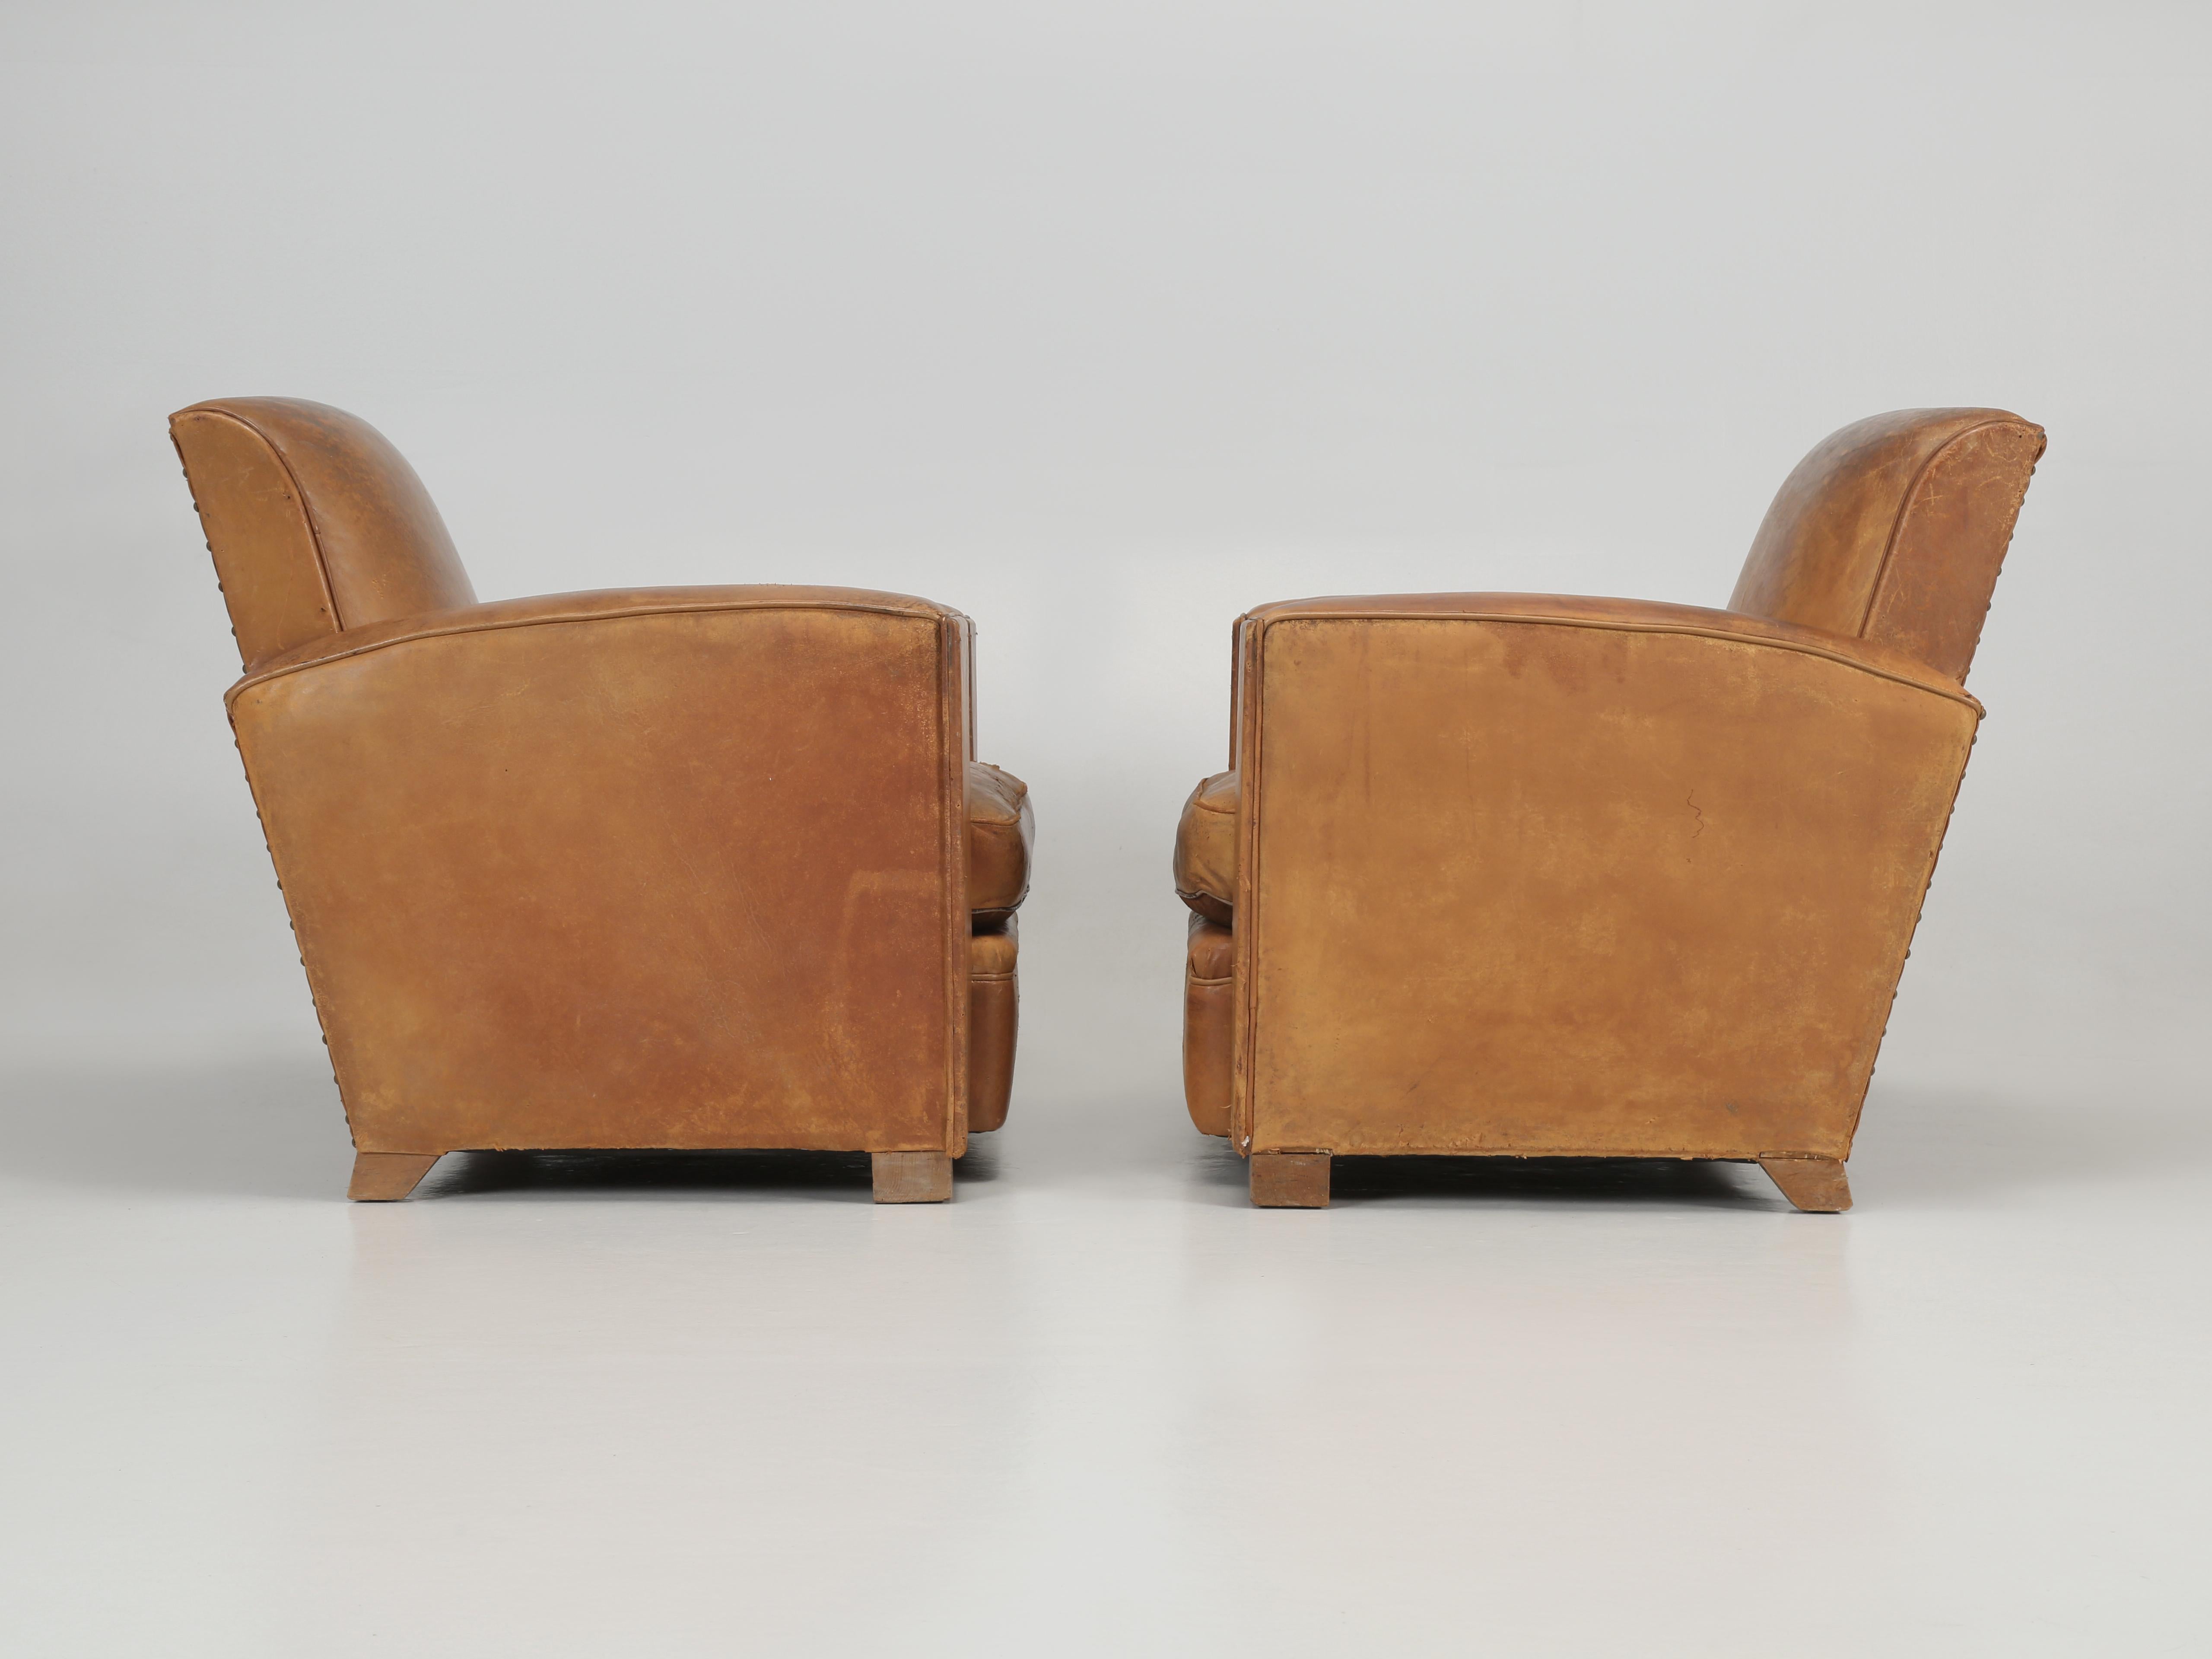 French Leather Club Chairs Restored Internally and Cosmetically Still Original For Sale 8